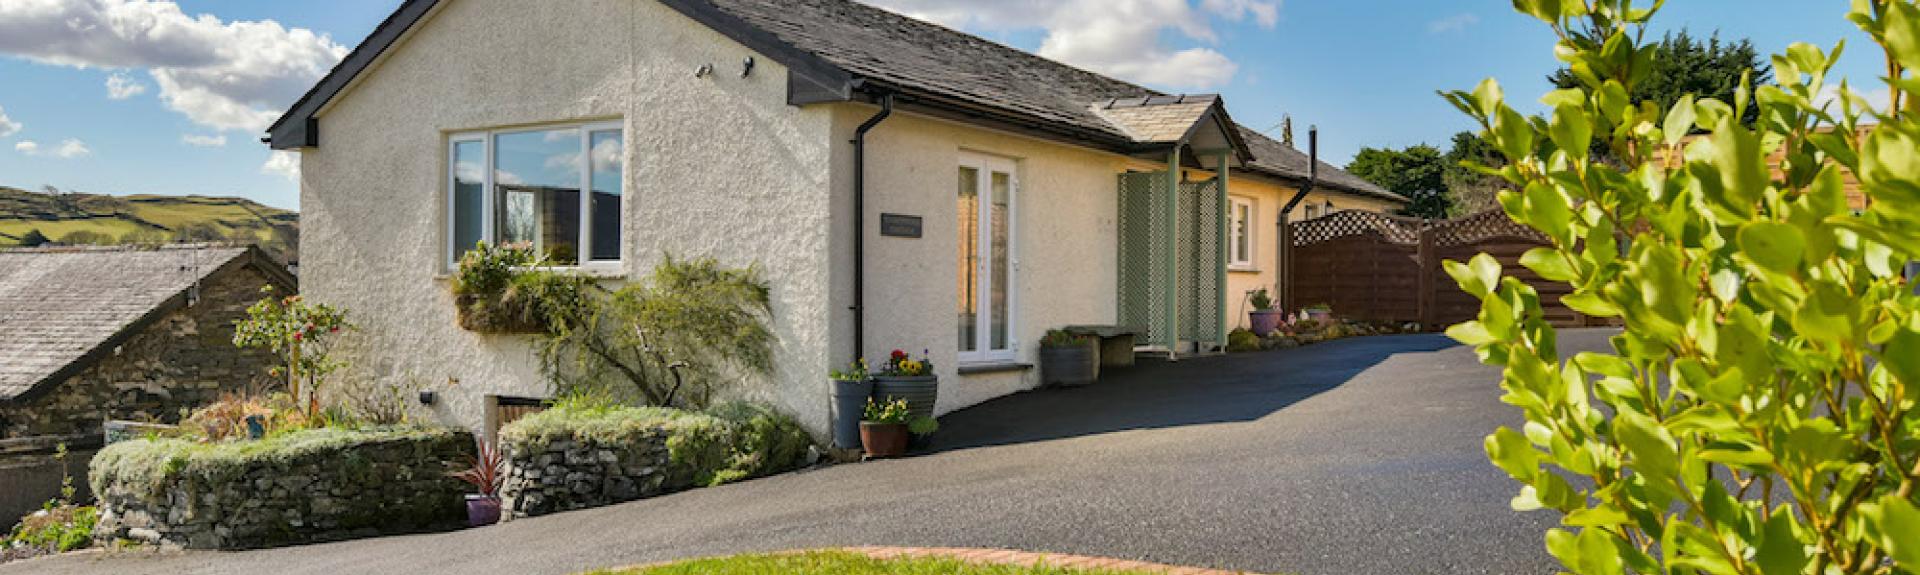 A Coniston holiday bungalow with a lawn and large tarmac space for guest's cars